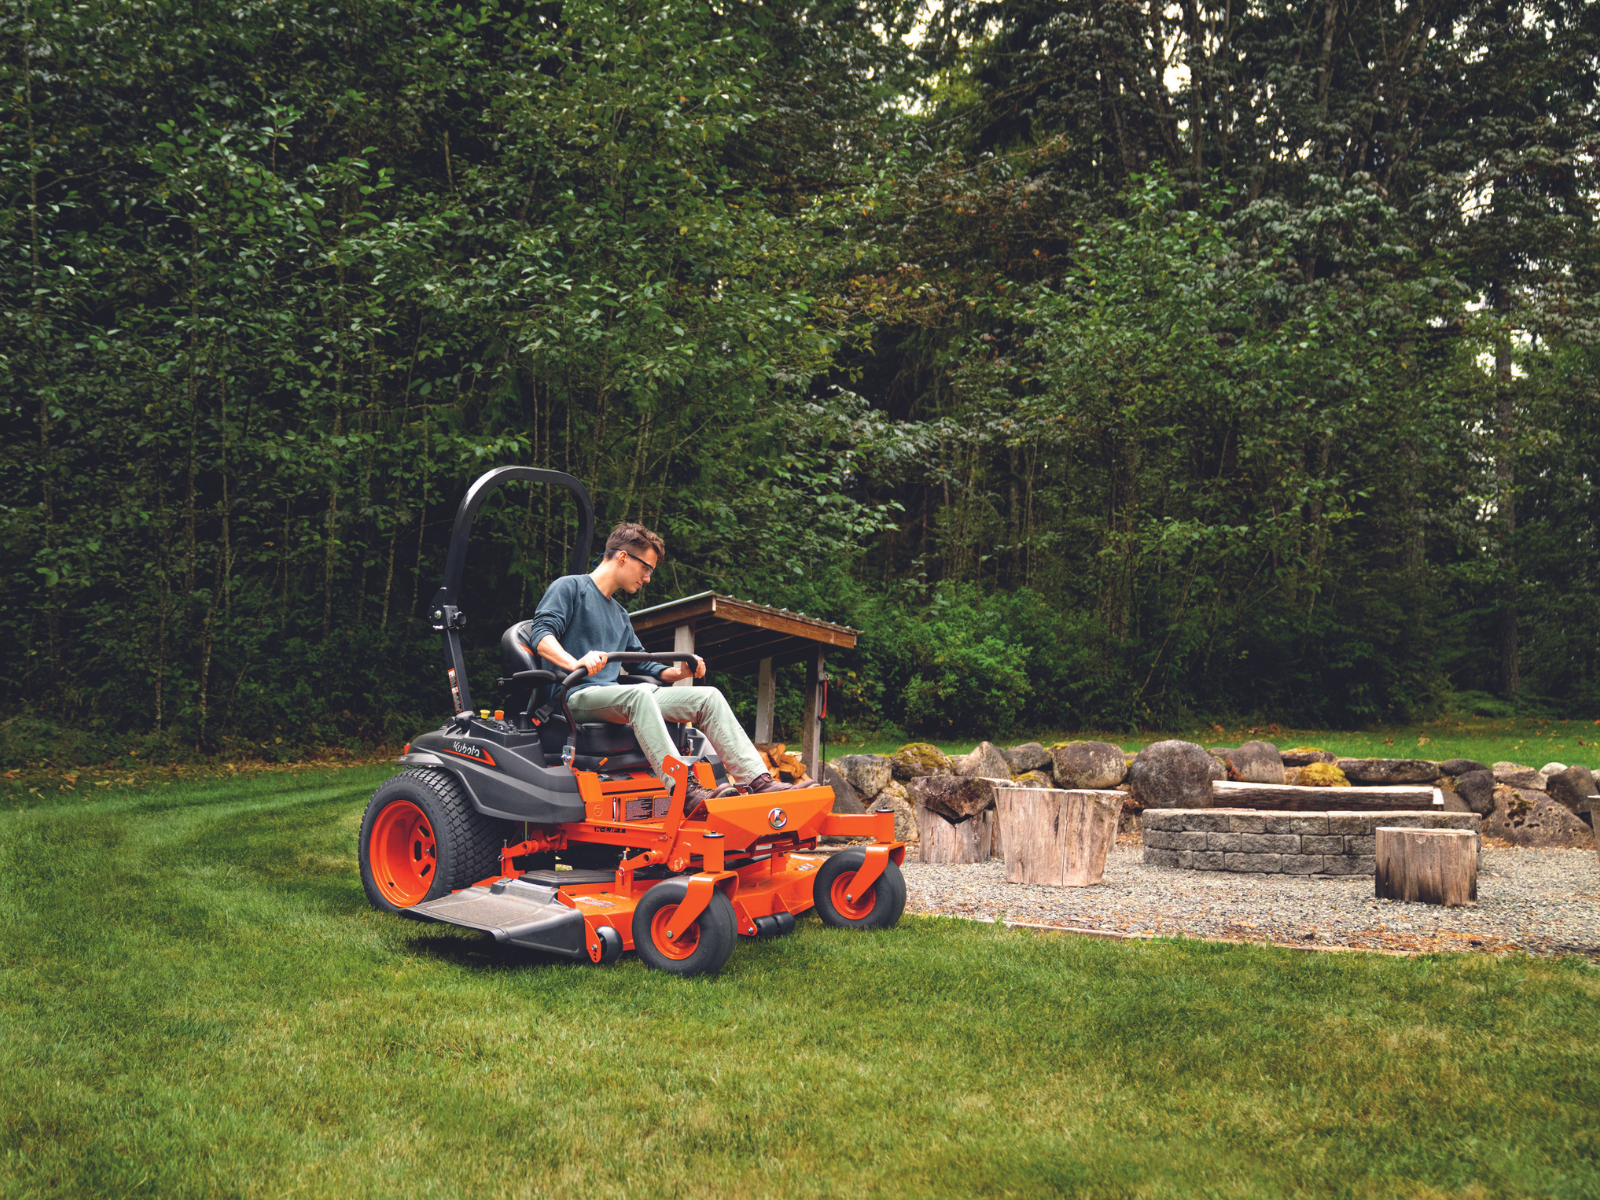 New Kubota Partnership Offers Big Discounts for Campgrounds